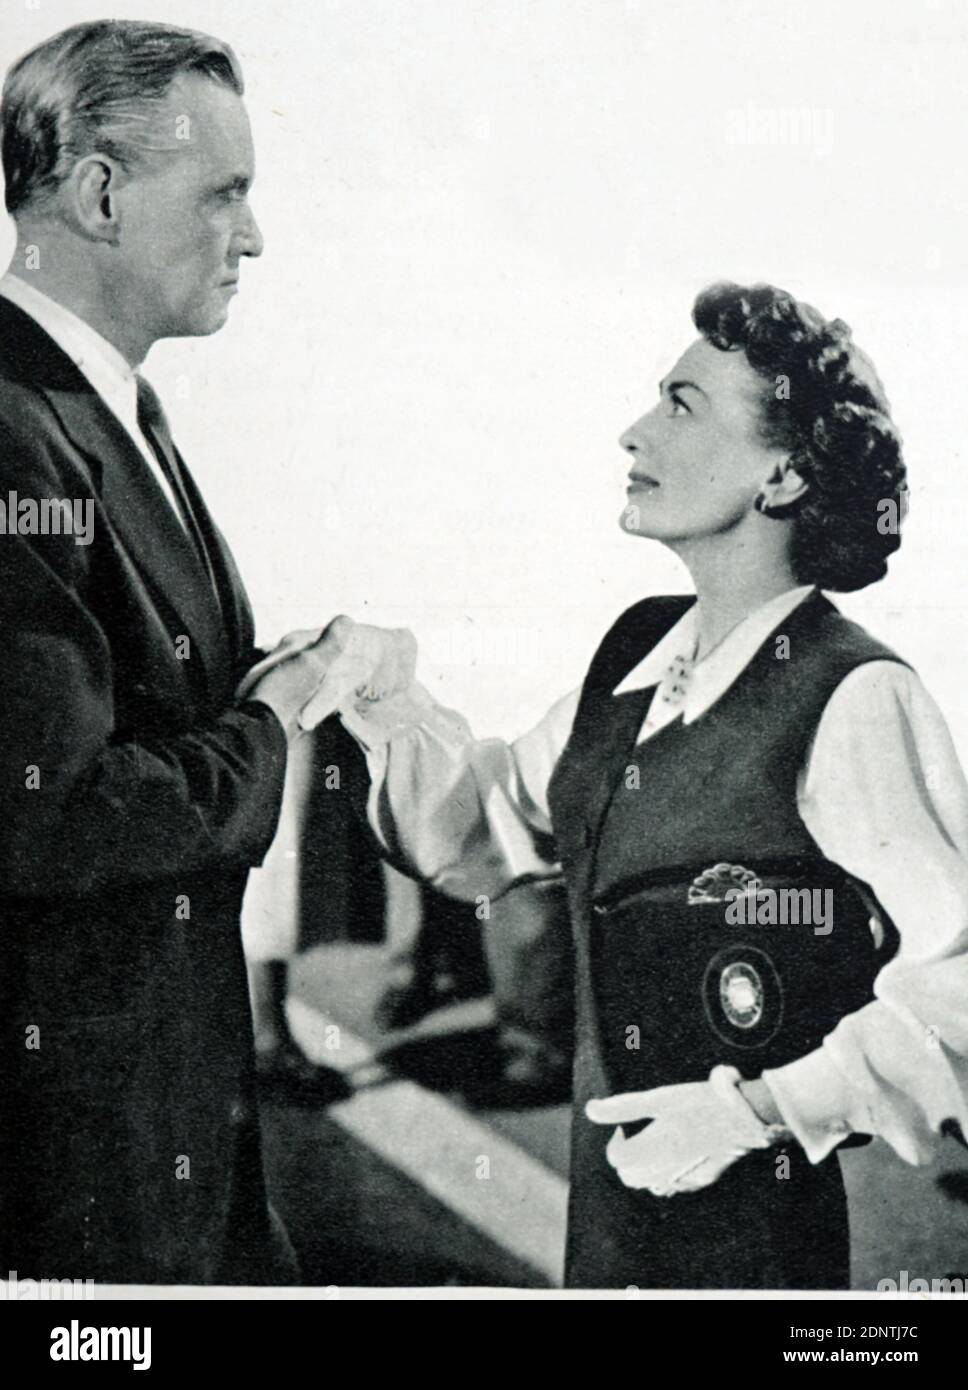 Film still from 'The Damned Don't Cry' starring Joan Crawford and David Brian. Stock Photo